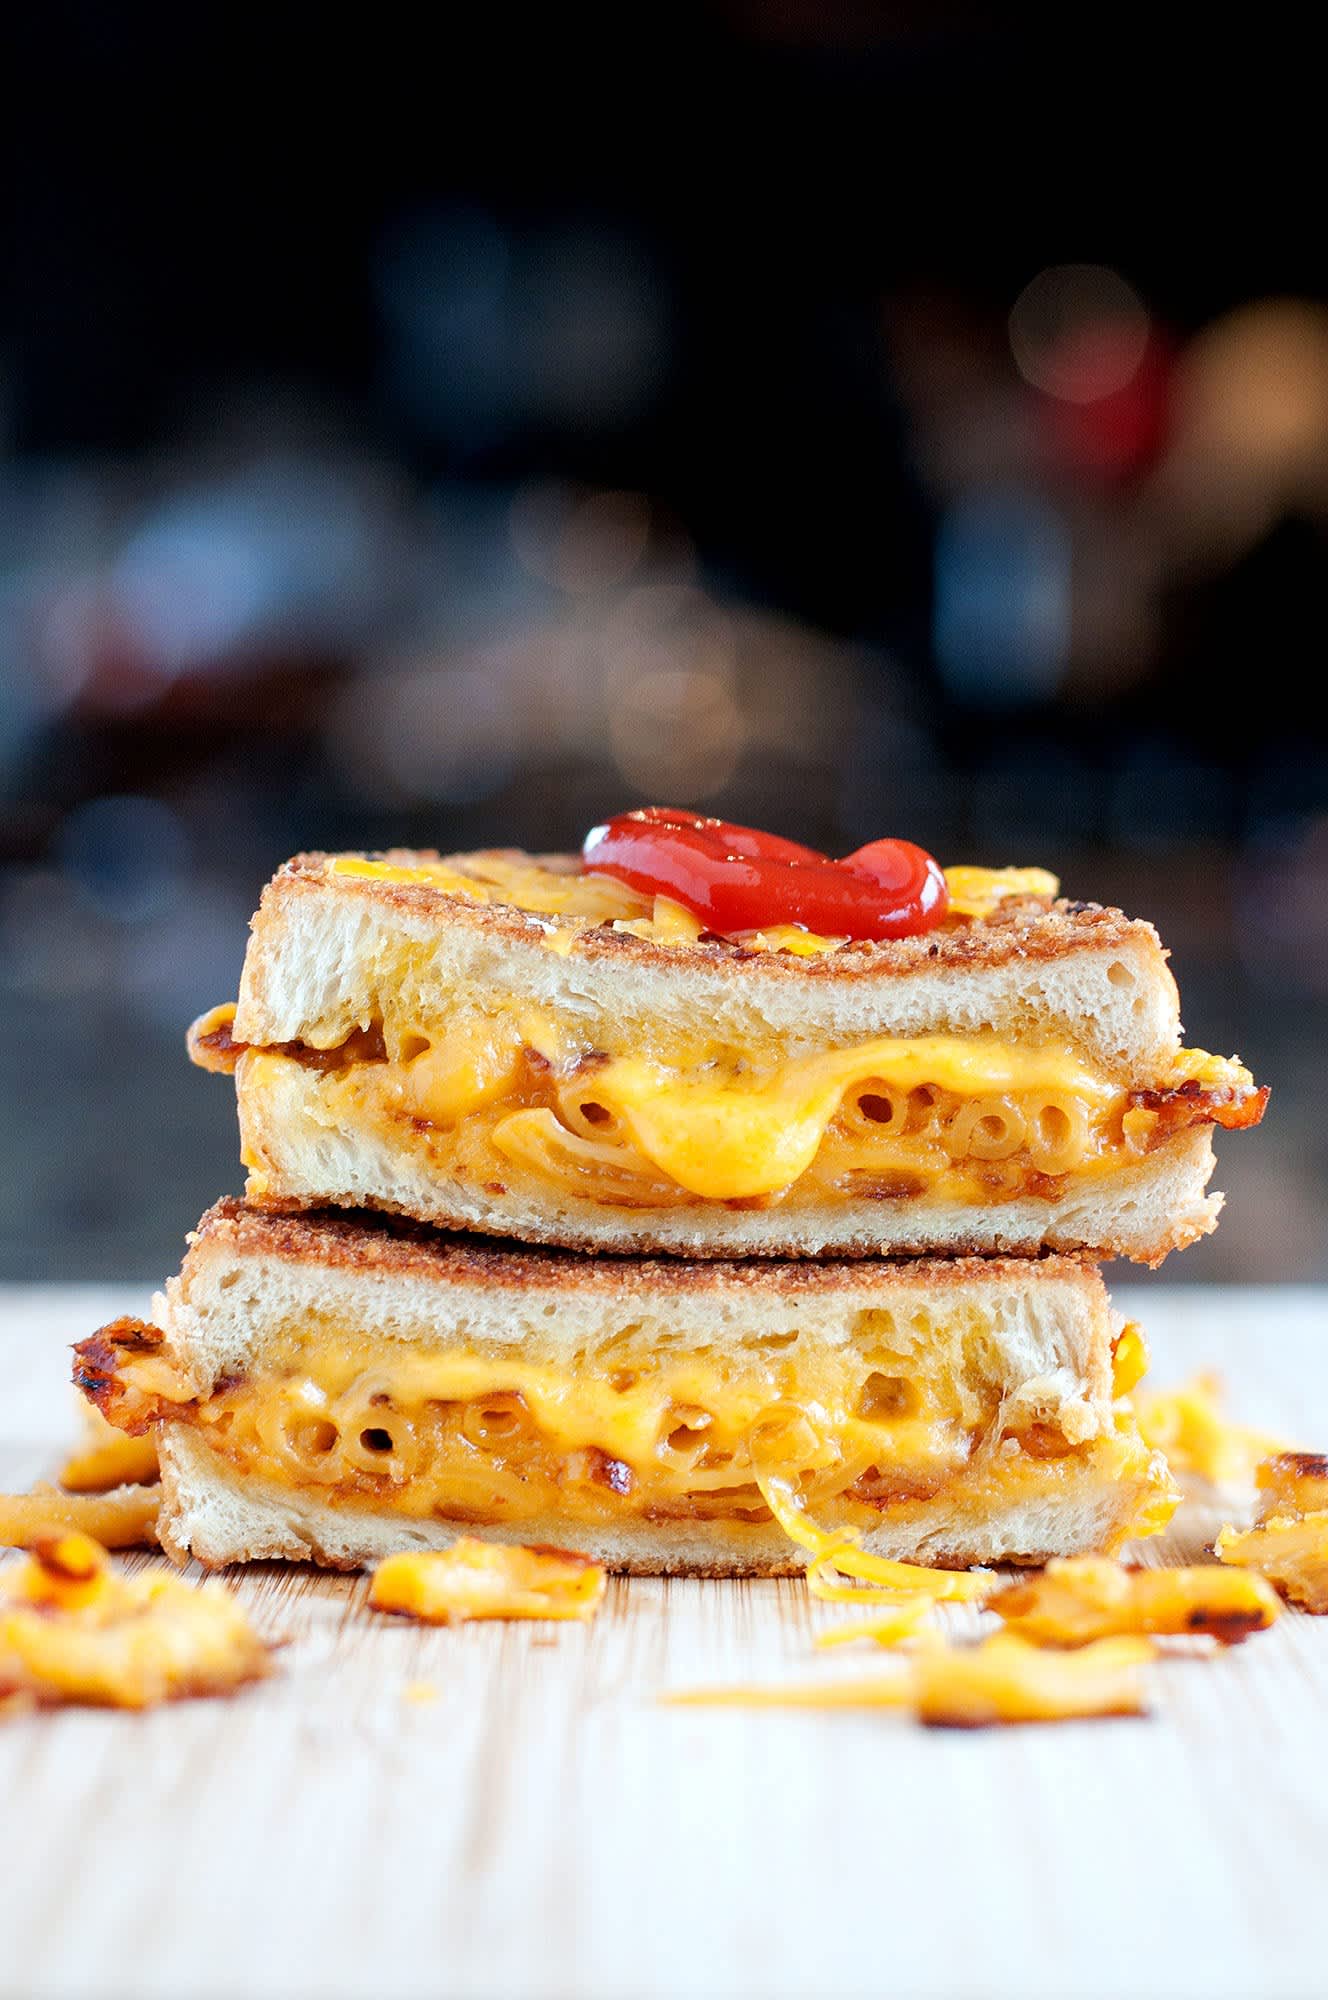 Mac & Cheese Grilled Cheese